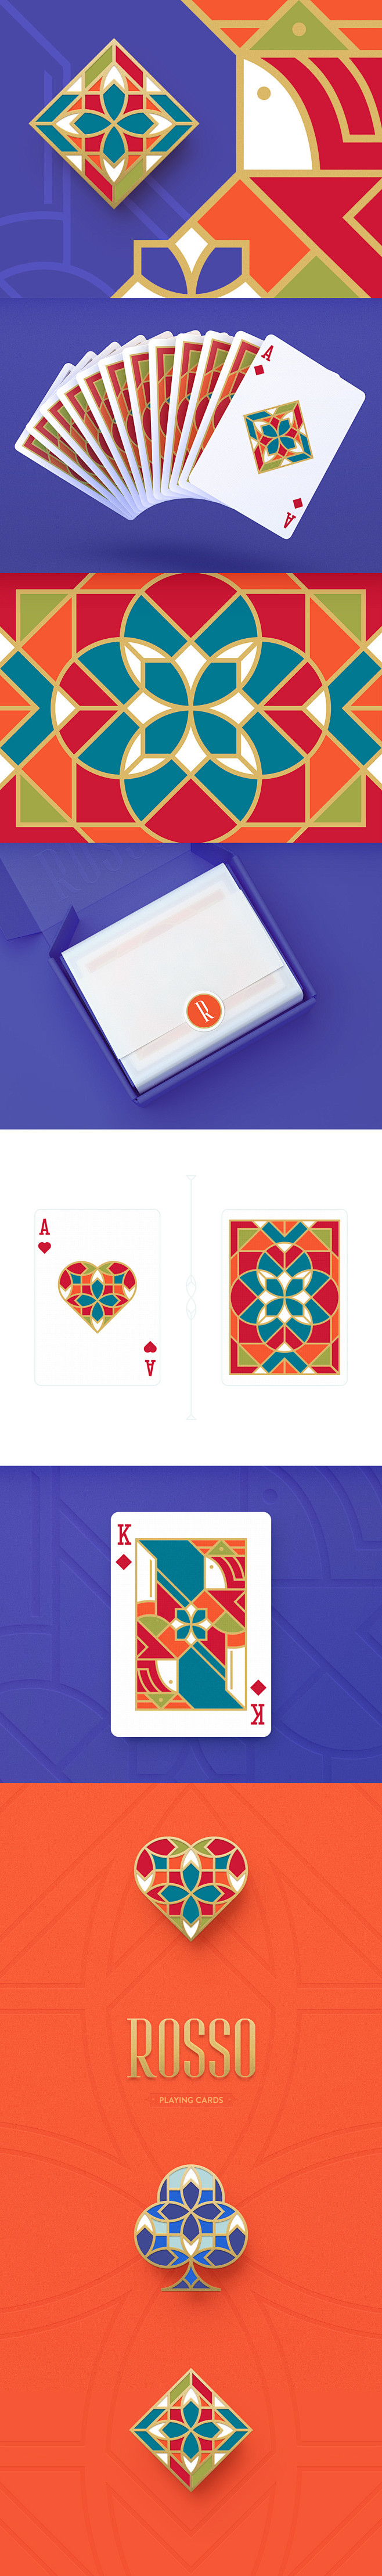 Playing cards flat d...